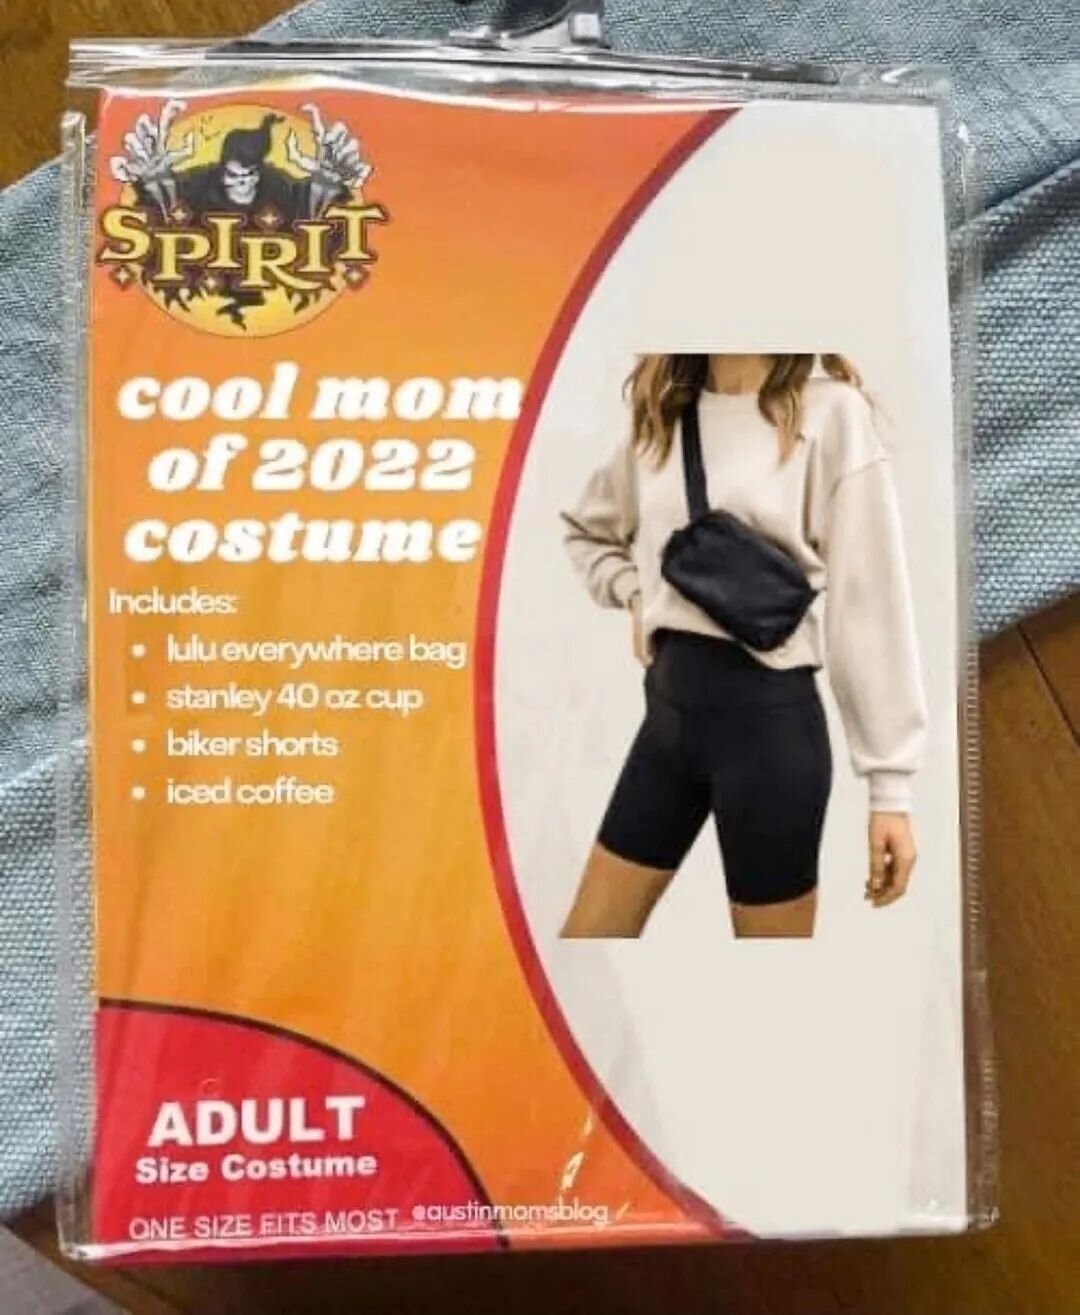 I feel very seen right now.
Add Nike slides, and it's spot on 🤣
Don't know about the 'cool' part, but this is my go-to outfit everyday.

What's yours?

#coolmom #halloweencostume #momoutfitbutmakeitfashion #momlife #sleepconsulting #sleeptraininghel